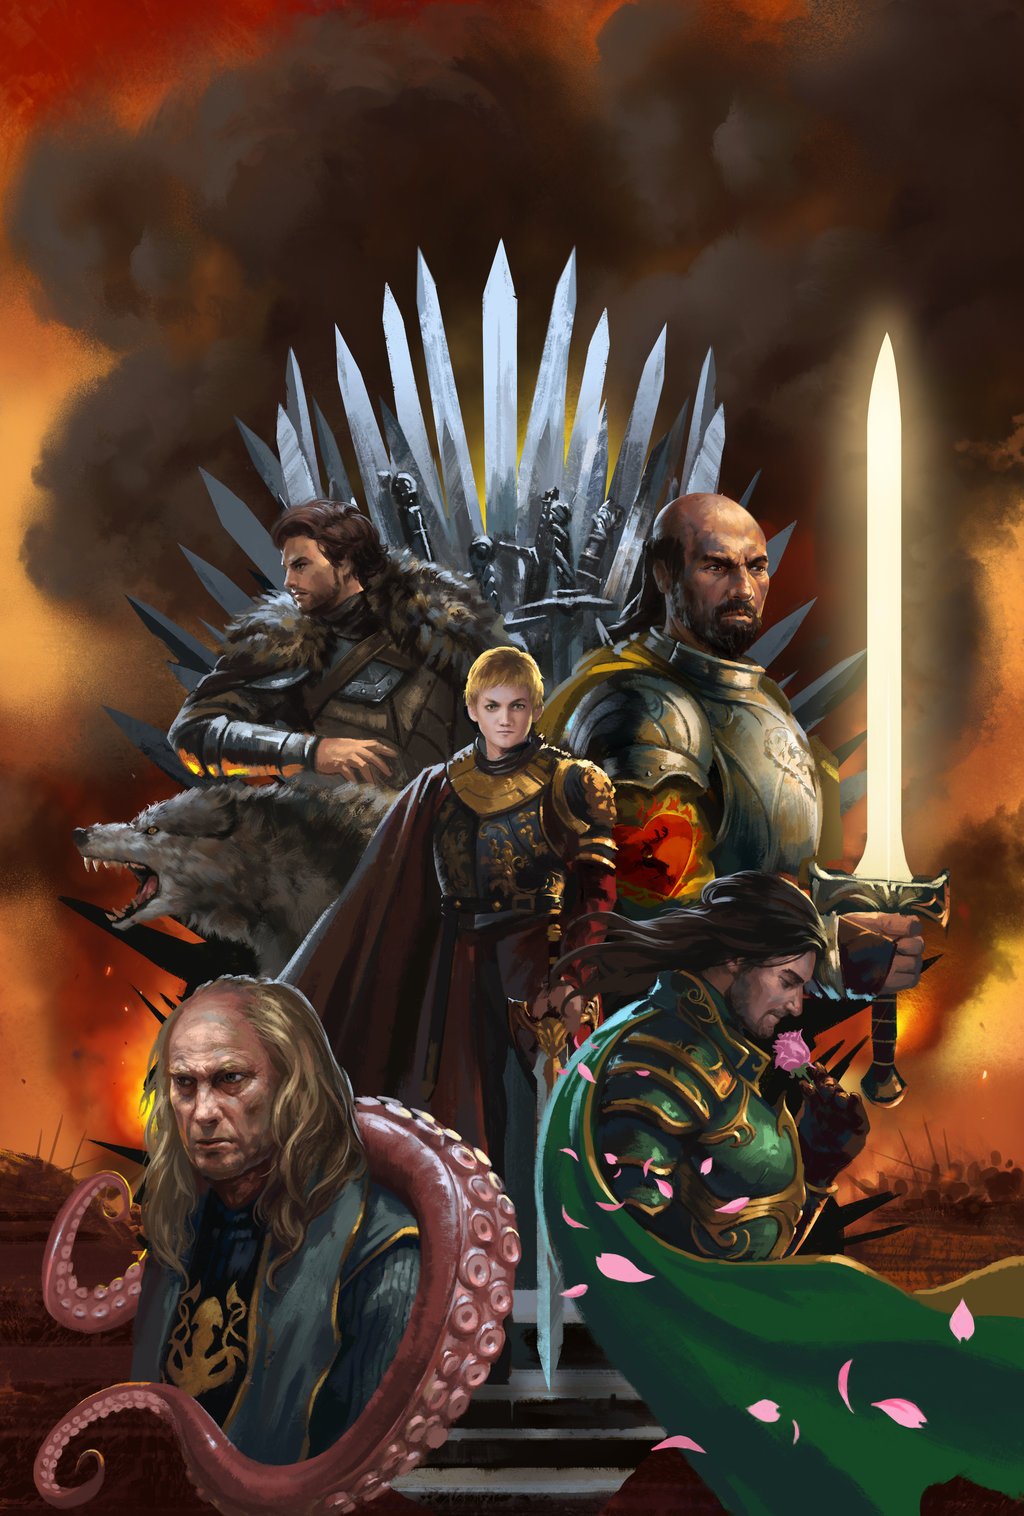 Tyrion image - A Clash of Kings (Game of Thrones) mod for Mount